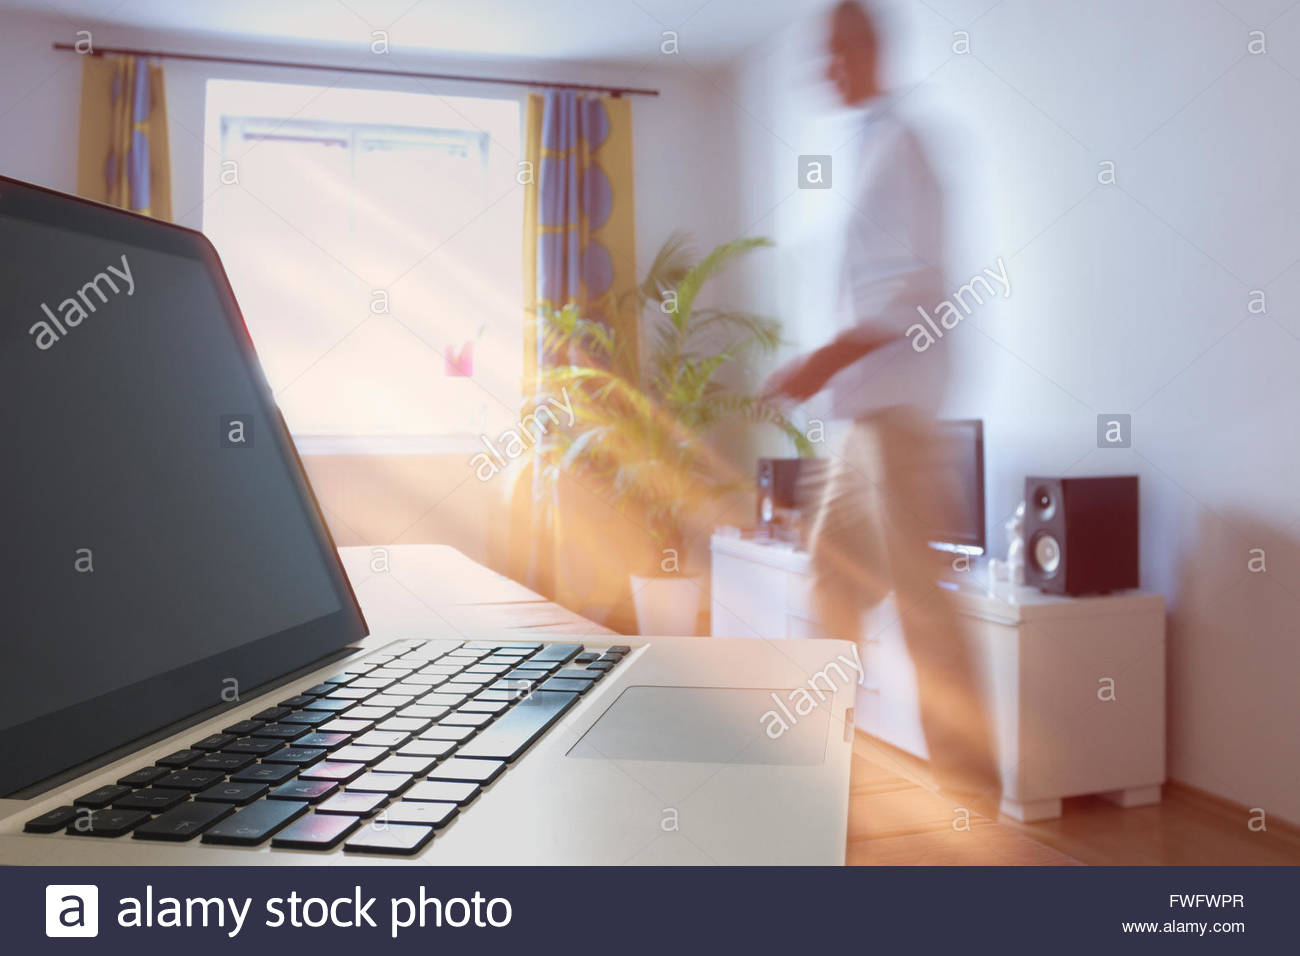 Laptop On Table With Man Walking In Background At Home Stock Photo